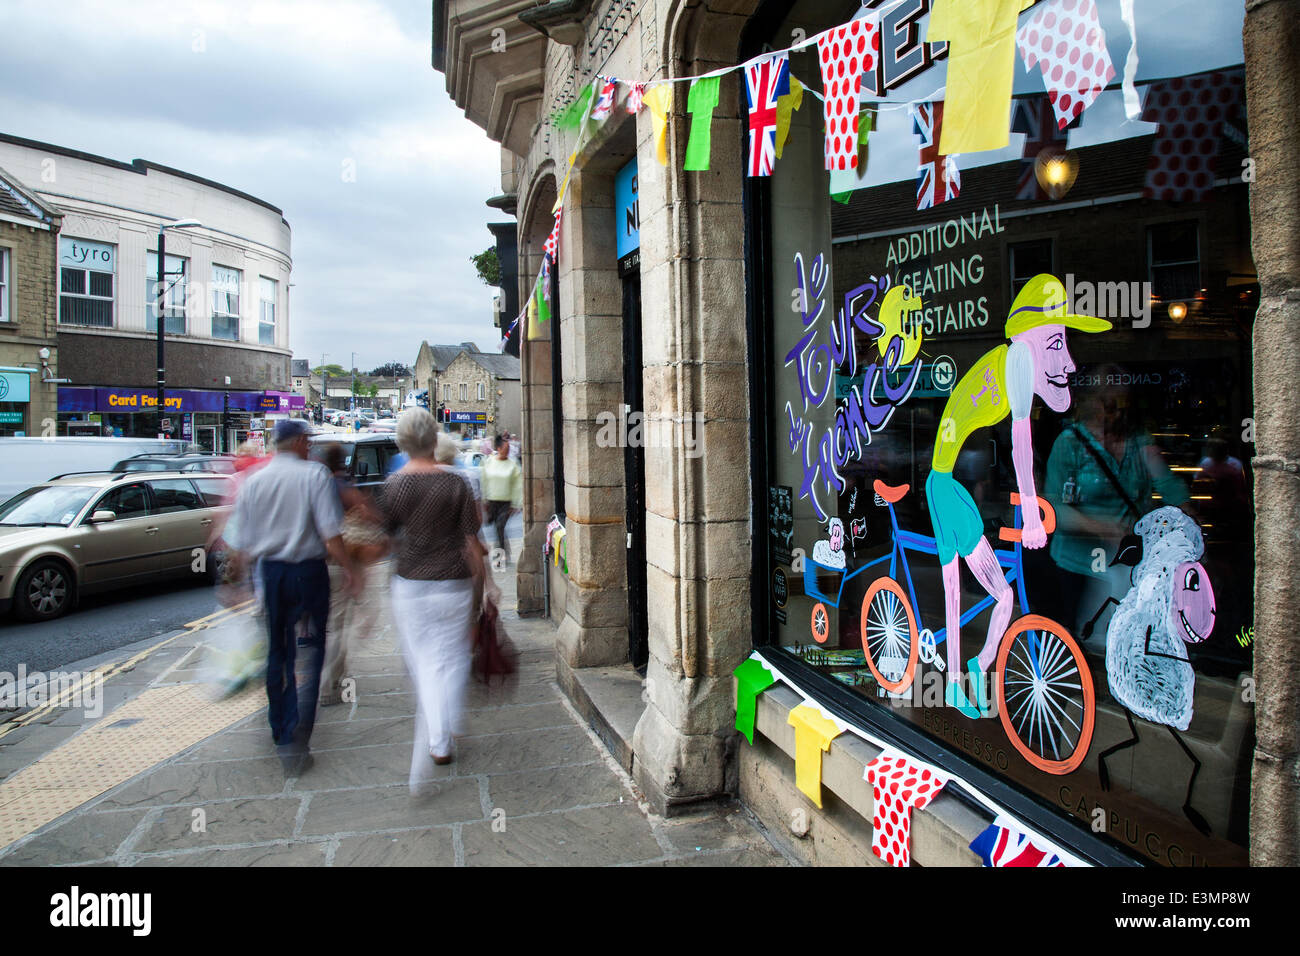 Skipton, Yorkshire Dales National Park, UK. 25th June, 2014. Bikes, Bunting and Window Art as Yorkshire prepares for Le Tour de France by decorating the route with yellow Bikes and Banners as Businesses gear up for the world's greatest cycle race - the Tour de France - which will start in the county on 5th & 6th July 2014 bringing millions of fans to the Yorkshire roadside to cheer on the champions of the sport.  It will be the first time Le Tour has visited the north of England having previously only made visits to the south coast and the capital. Credit:  Mar Photographics/Alamy Live News Stock Photo